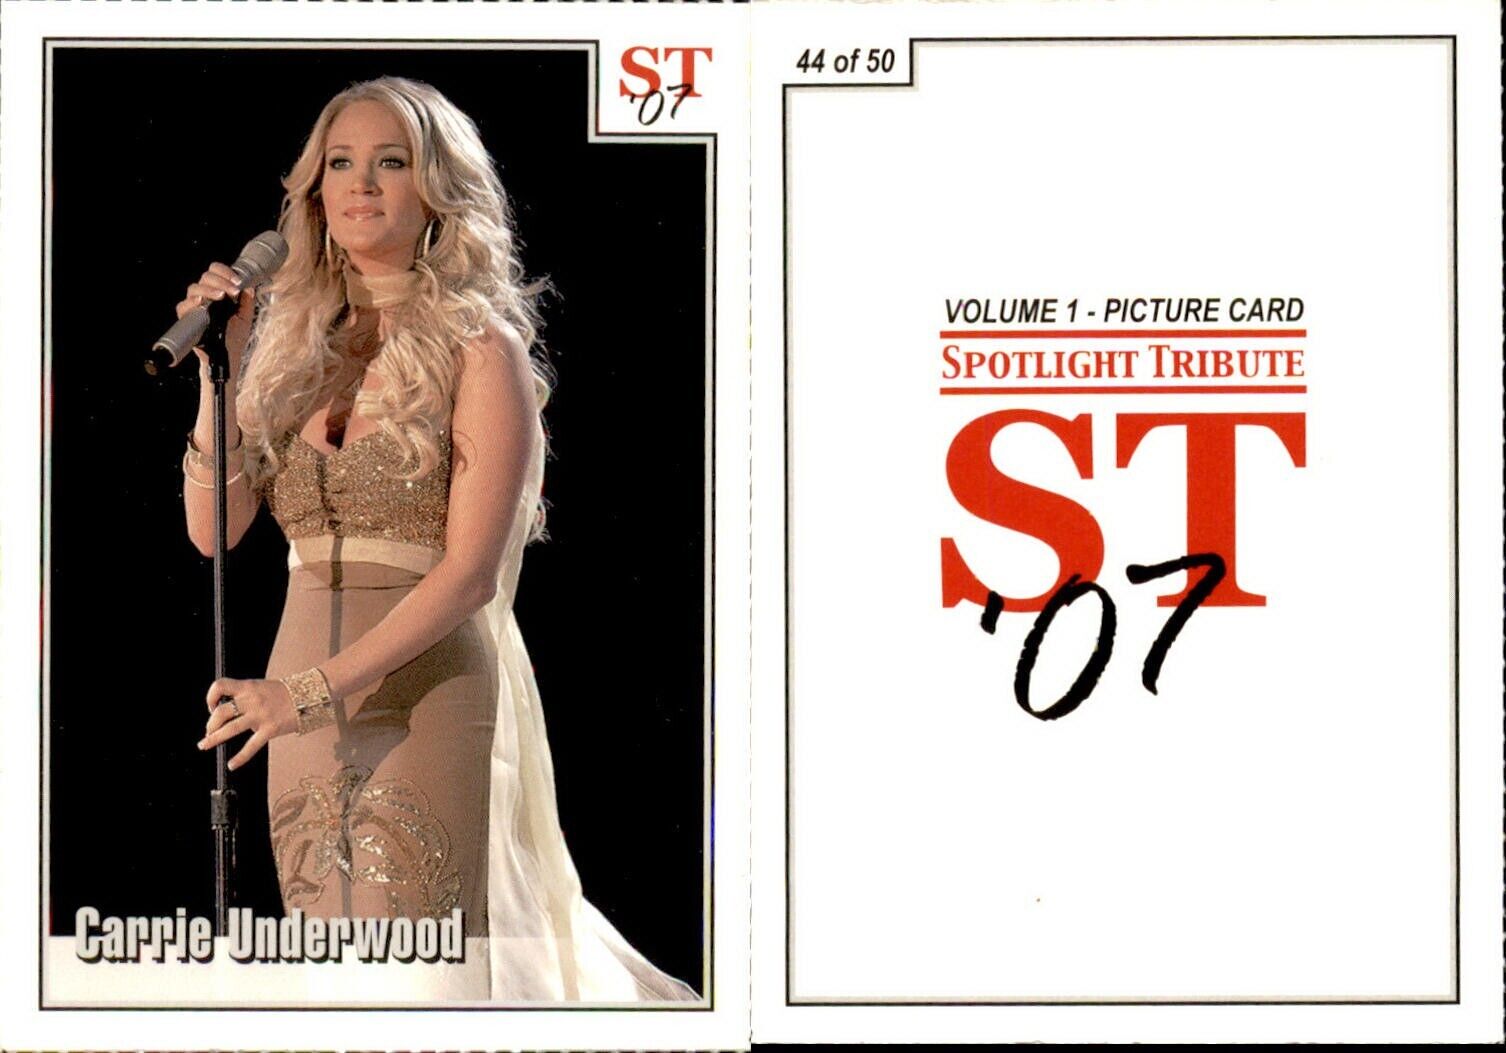 CARRIE UNDERWOOD Volume 1 perforated card #44 2007 Spotlight Tribute Card